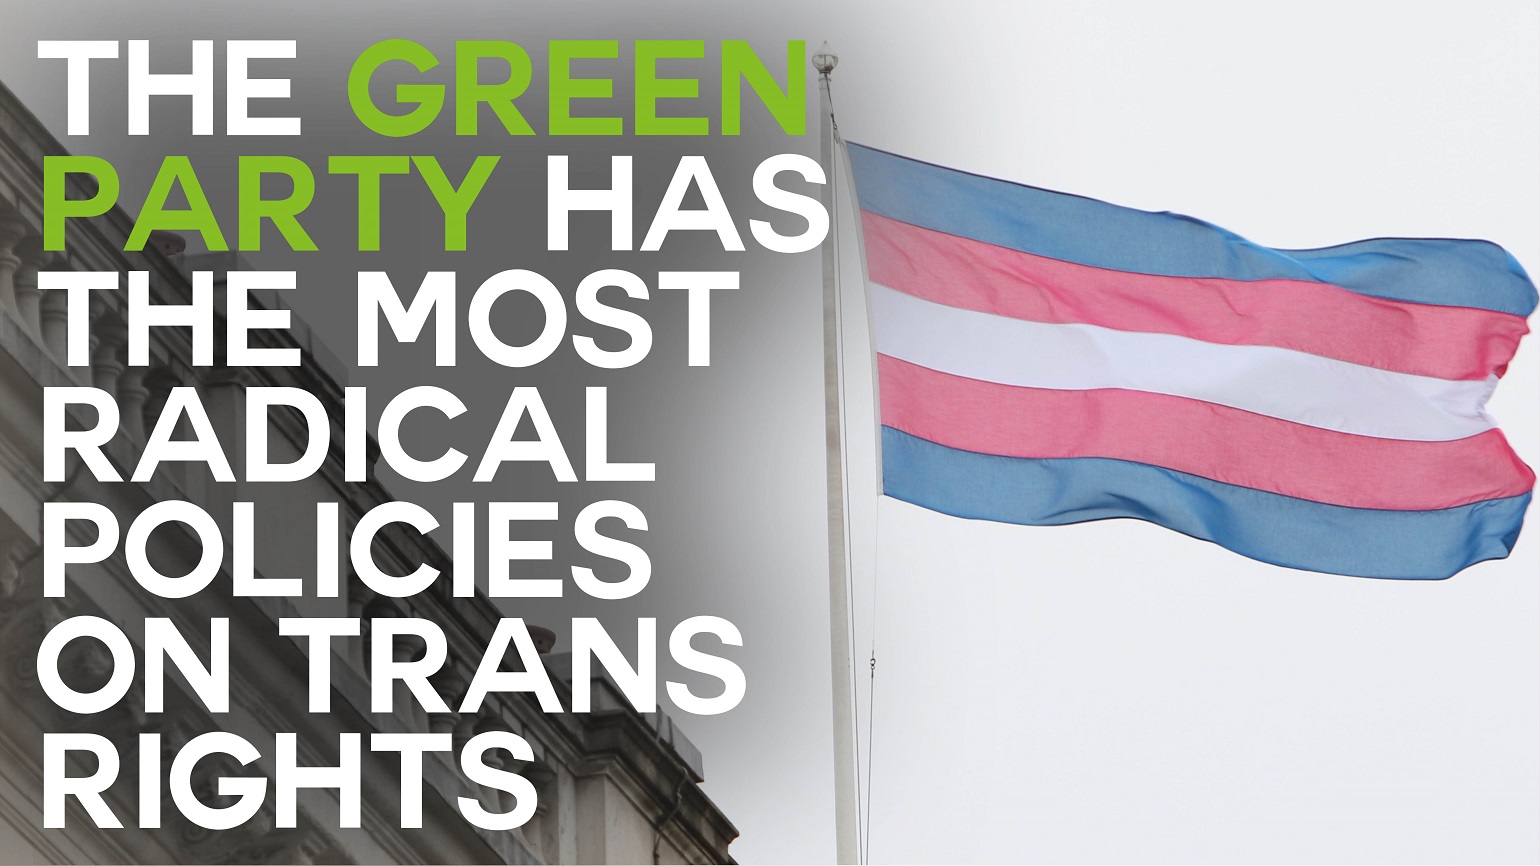 A photo of a trans pride flag with text overlaid reading "The Green Party has the most radical policies on trans rights"